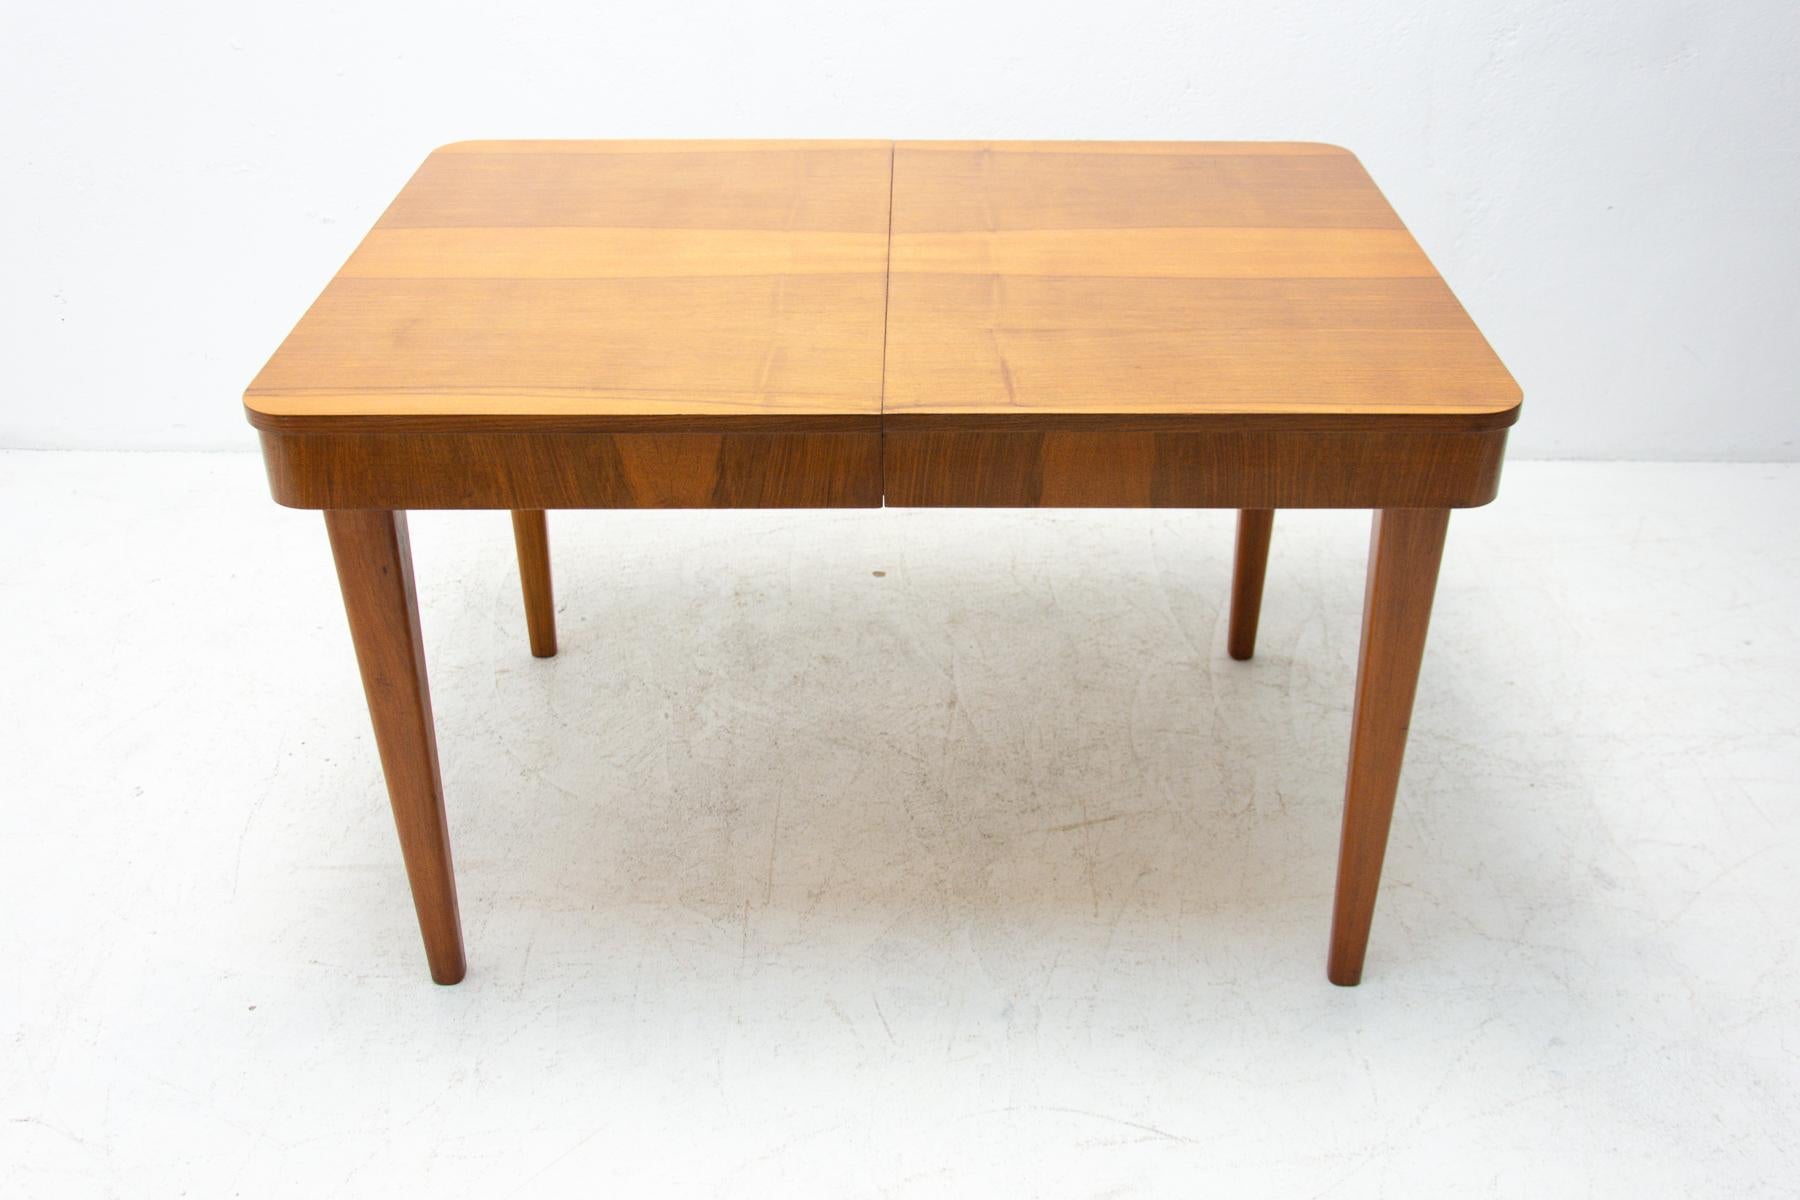 This adjustable dining table was designed and made in the 1950s in the former Czechoslovakia. It was designed by Jindrich Halabala for ÚP Závody Brno. The material is a combination of solid wood and walnut veneer. The table is in very good Vintage